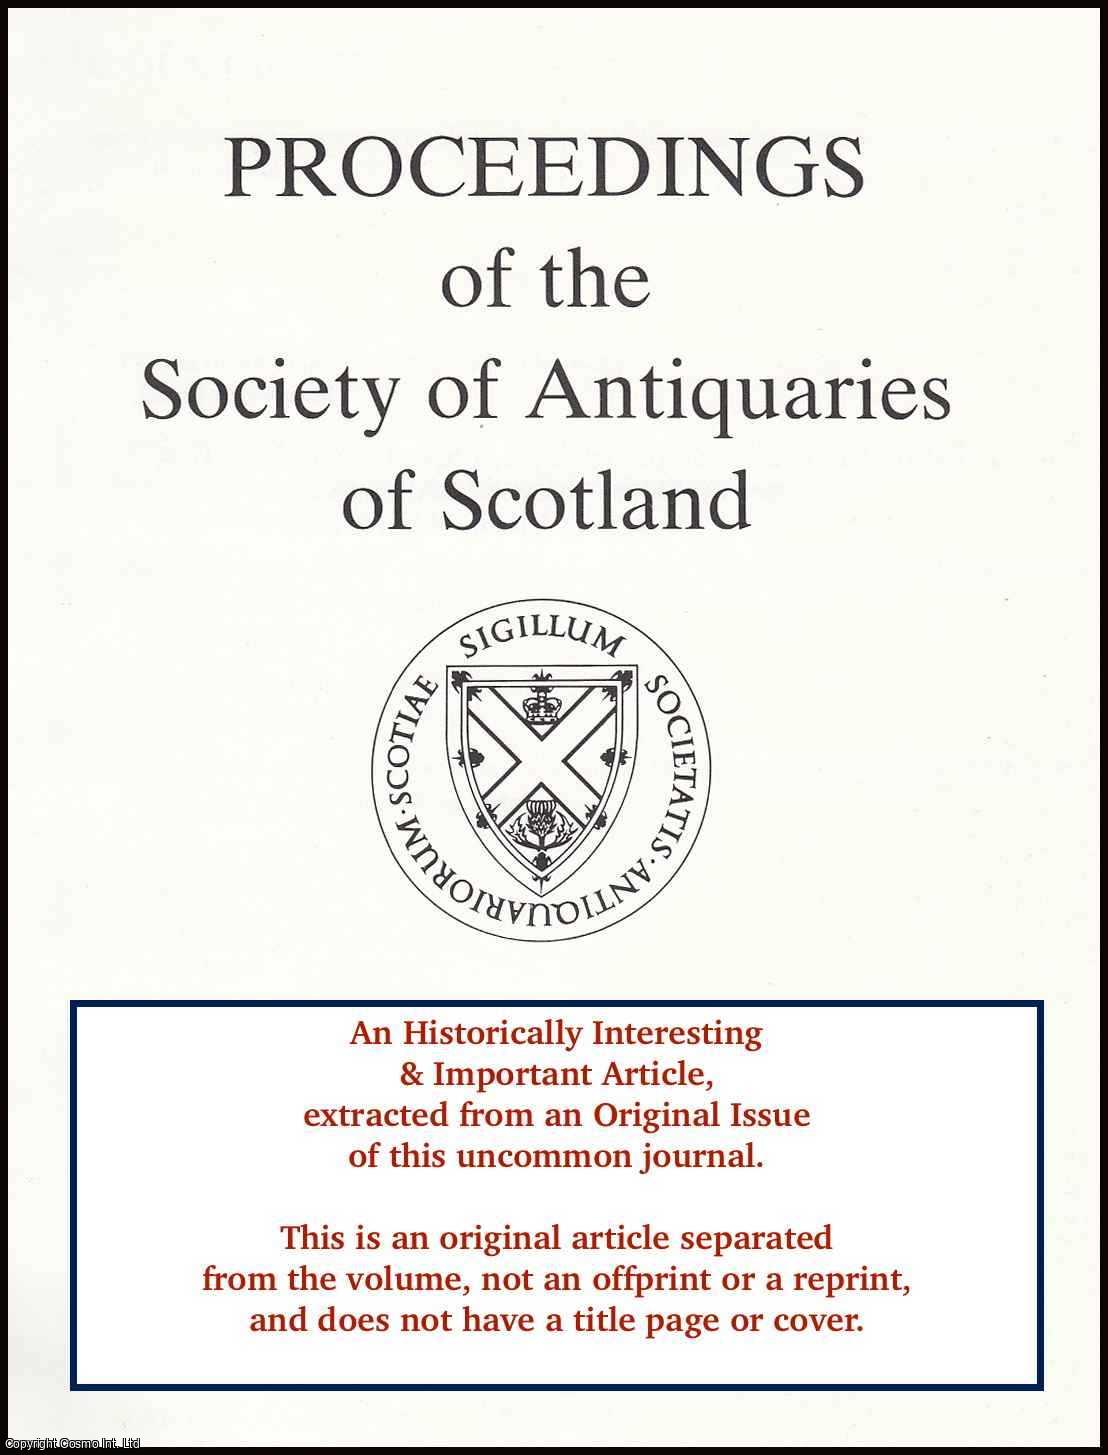 Alan Small & J. D. Bateson - Some Possible Dating Evidence For a Souterrain Near Alyth, Perthshire. An original article from the Proceedings of the Society of Antiquaries of Scotland, 1995.